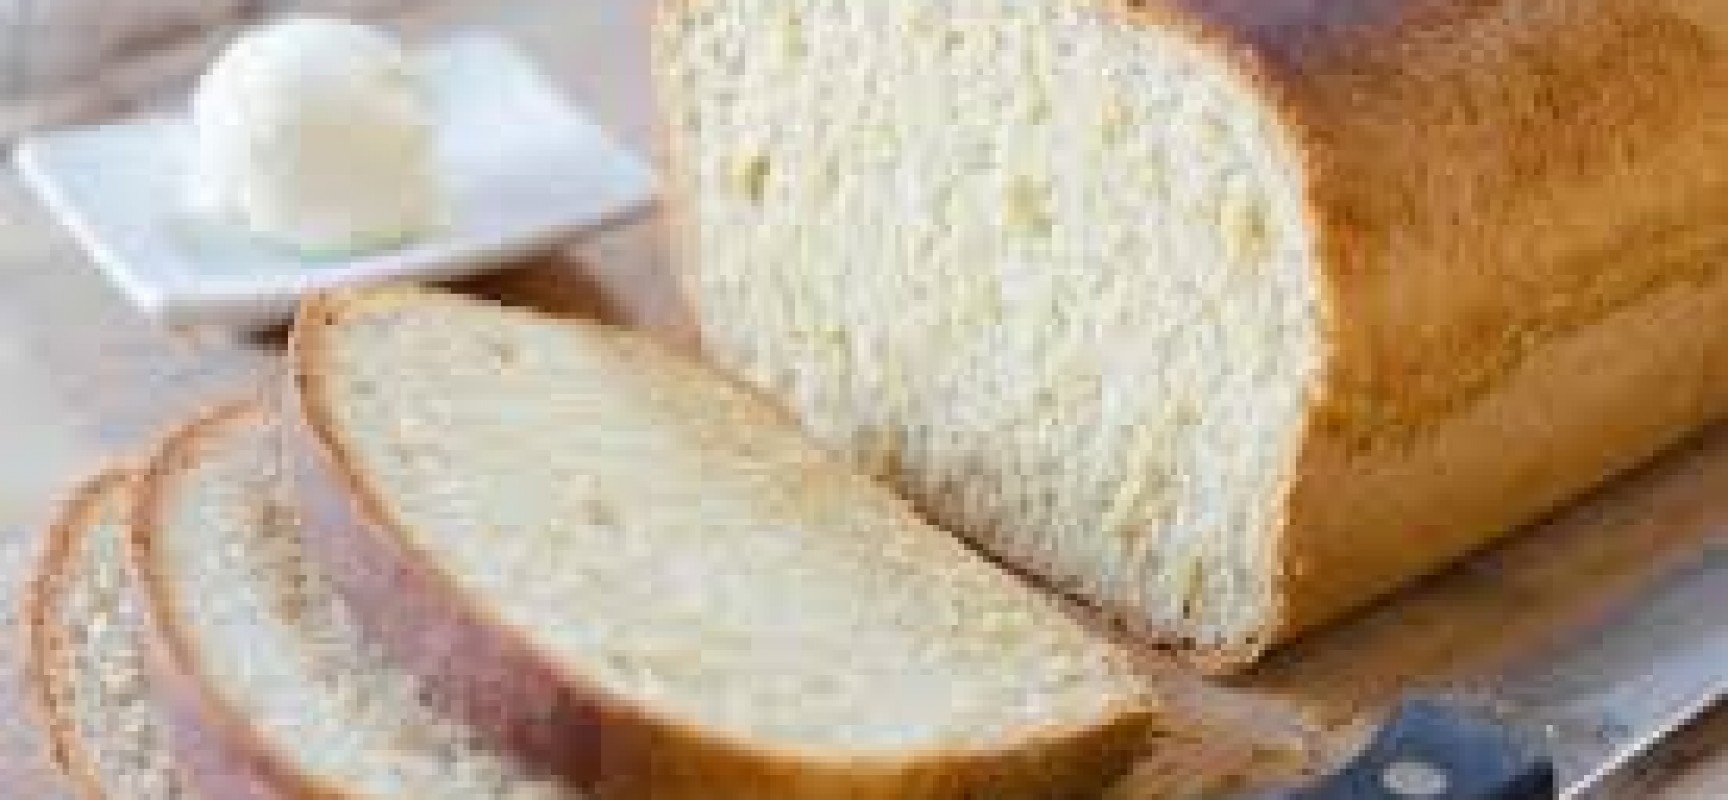 Go on and try some Bread based meal